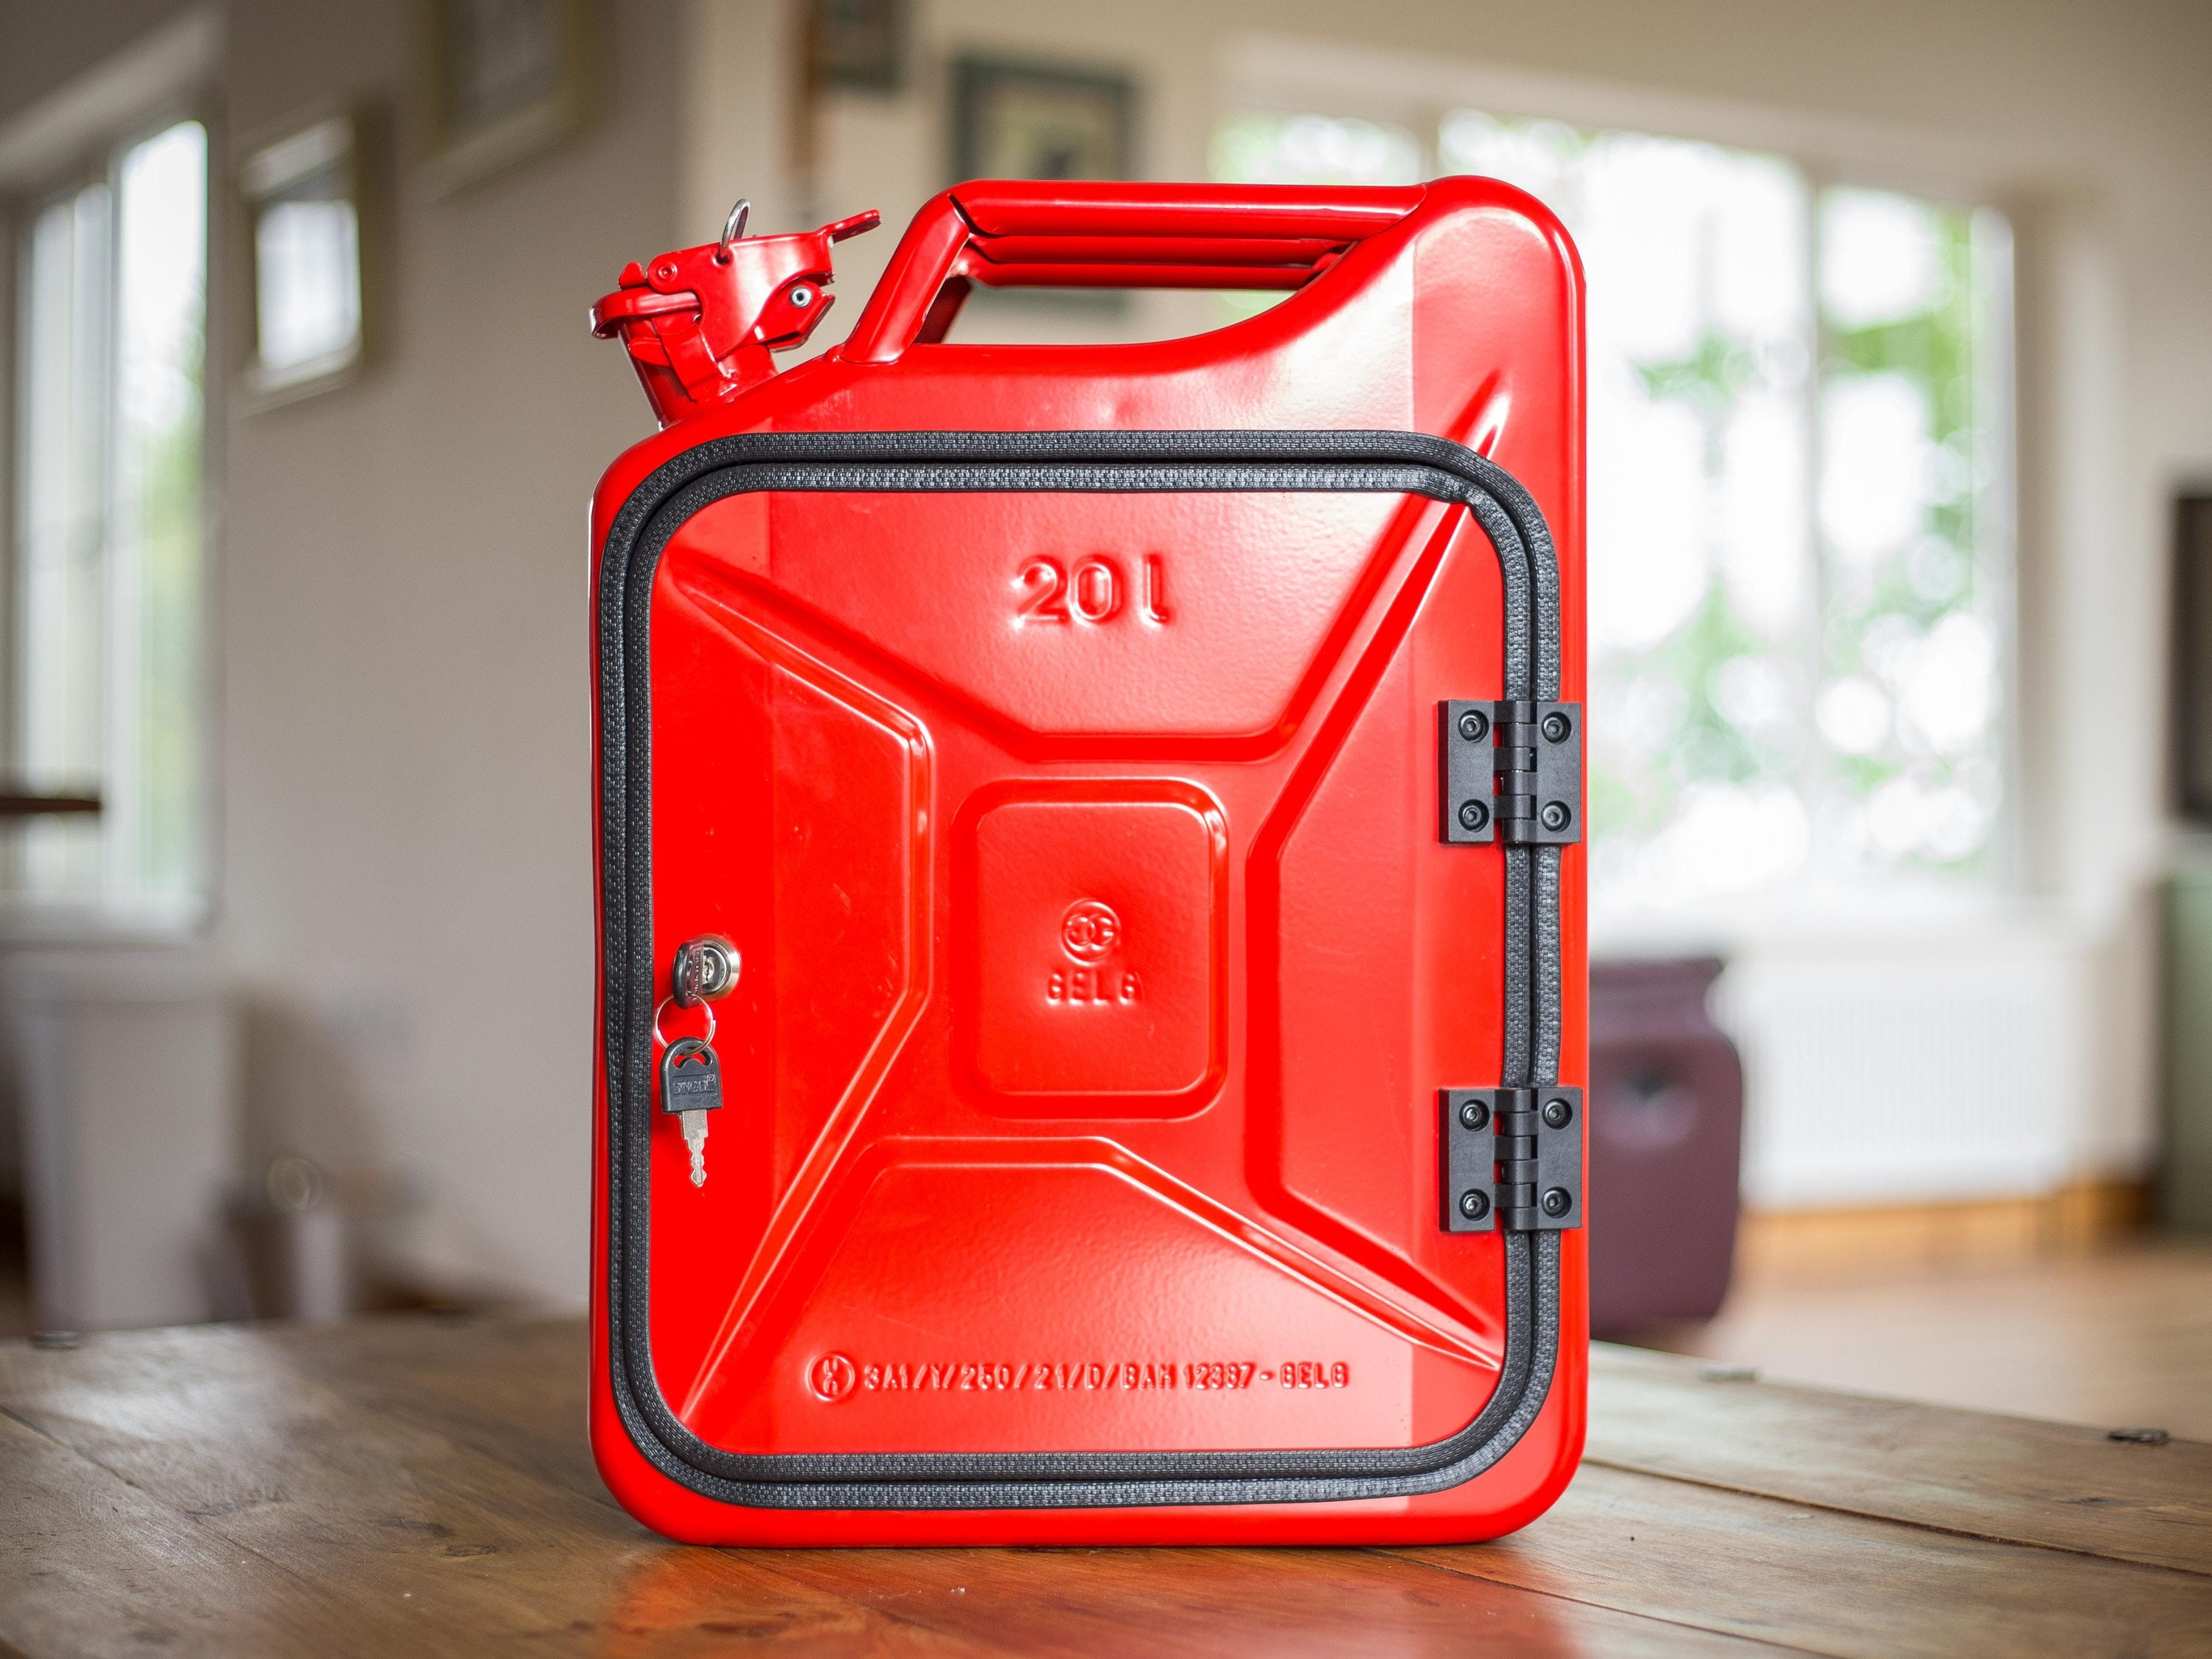 The best present a man can get, a unique jerry can containing a mini bar.